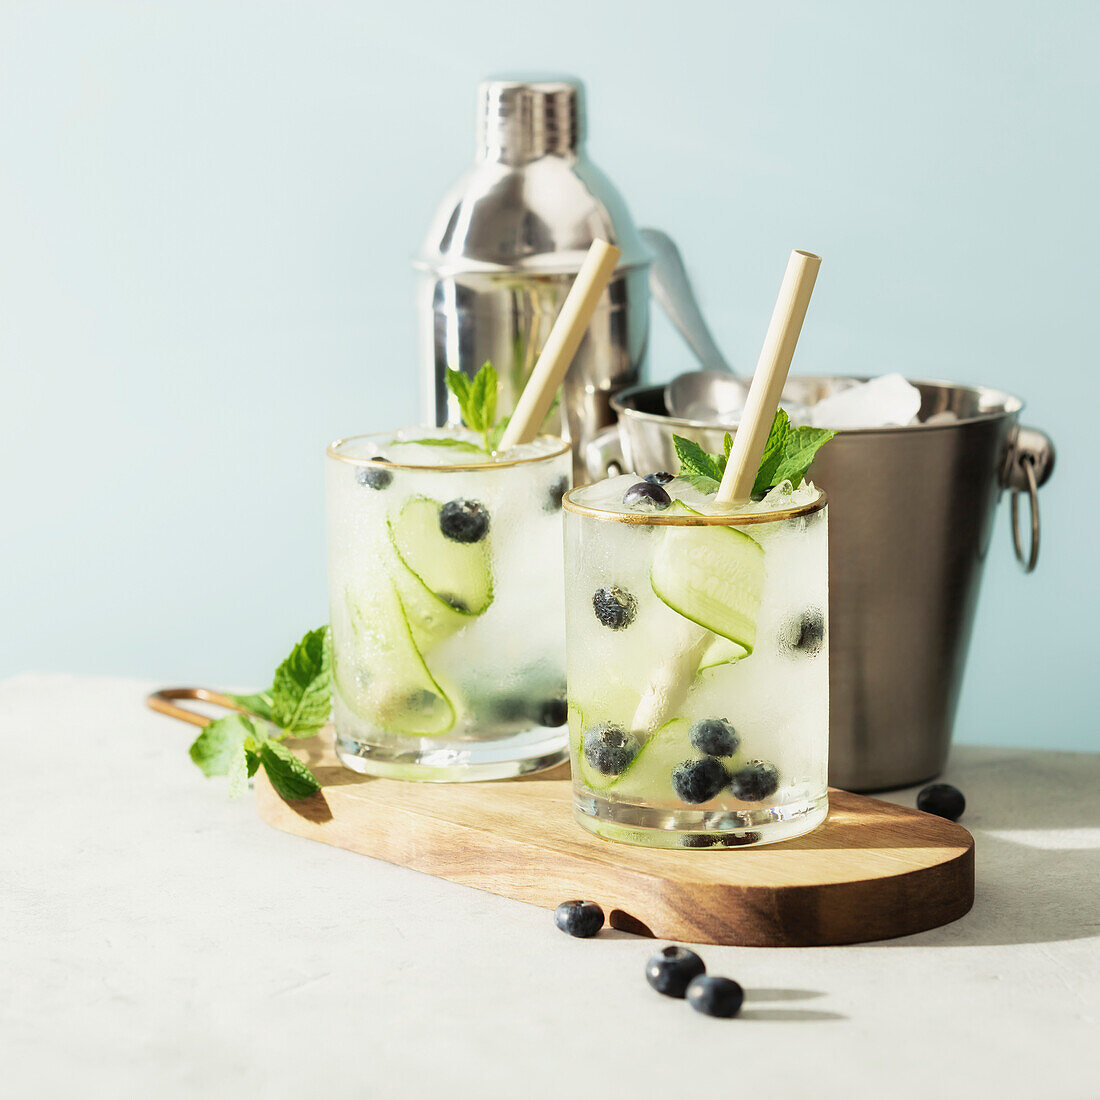 Trendy summer drink with cucumber, mint and blueberries